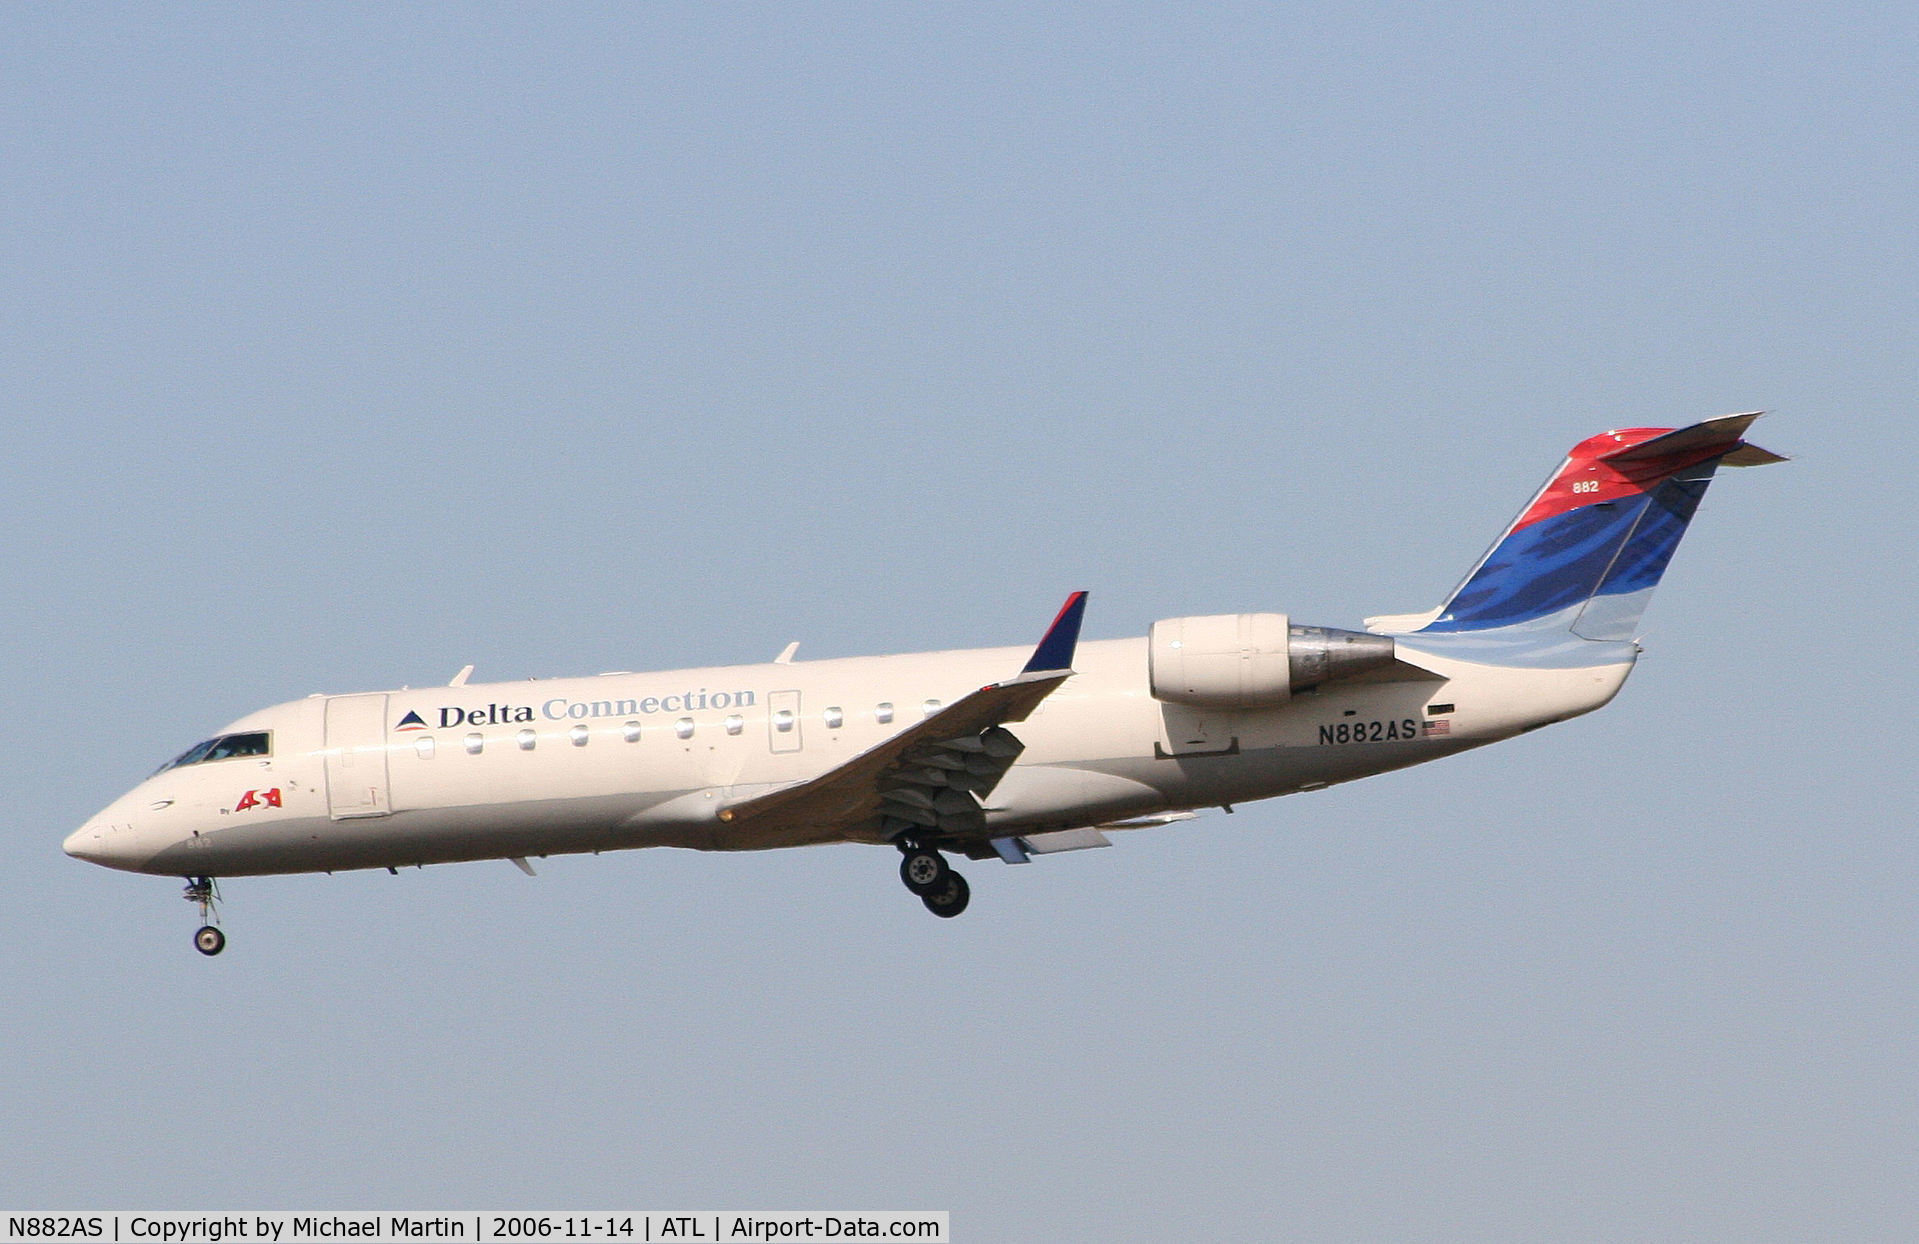 N882AS, 2001 Bombardier CRJ-200ER (CL-600-2B19) C/N 7503, Over the numbers of 27L